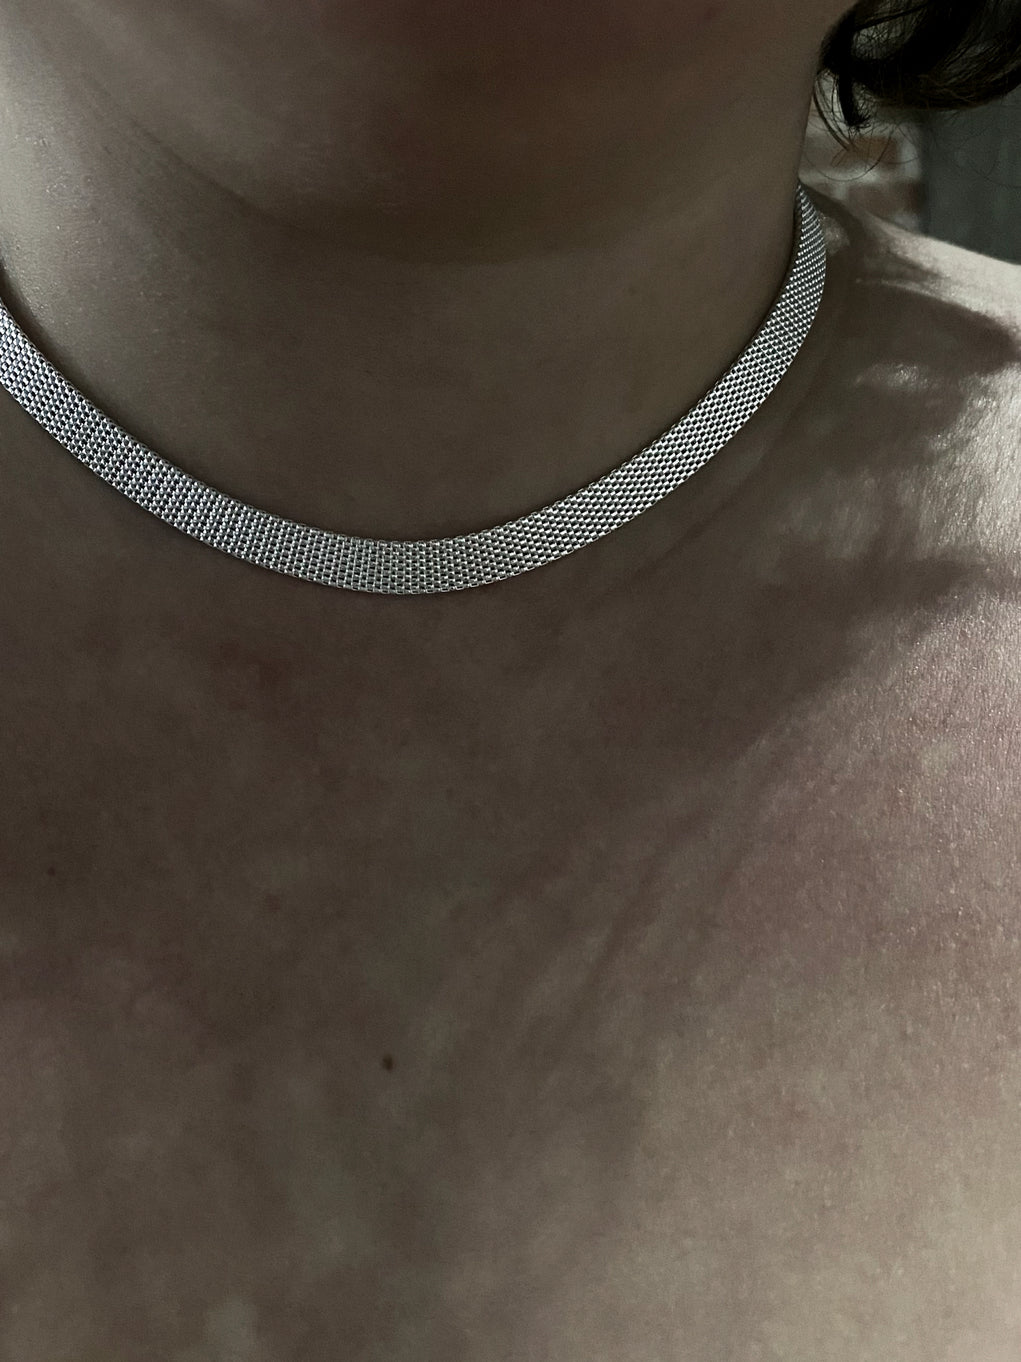 Wide silver chain on model